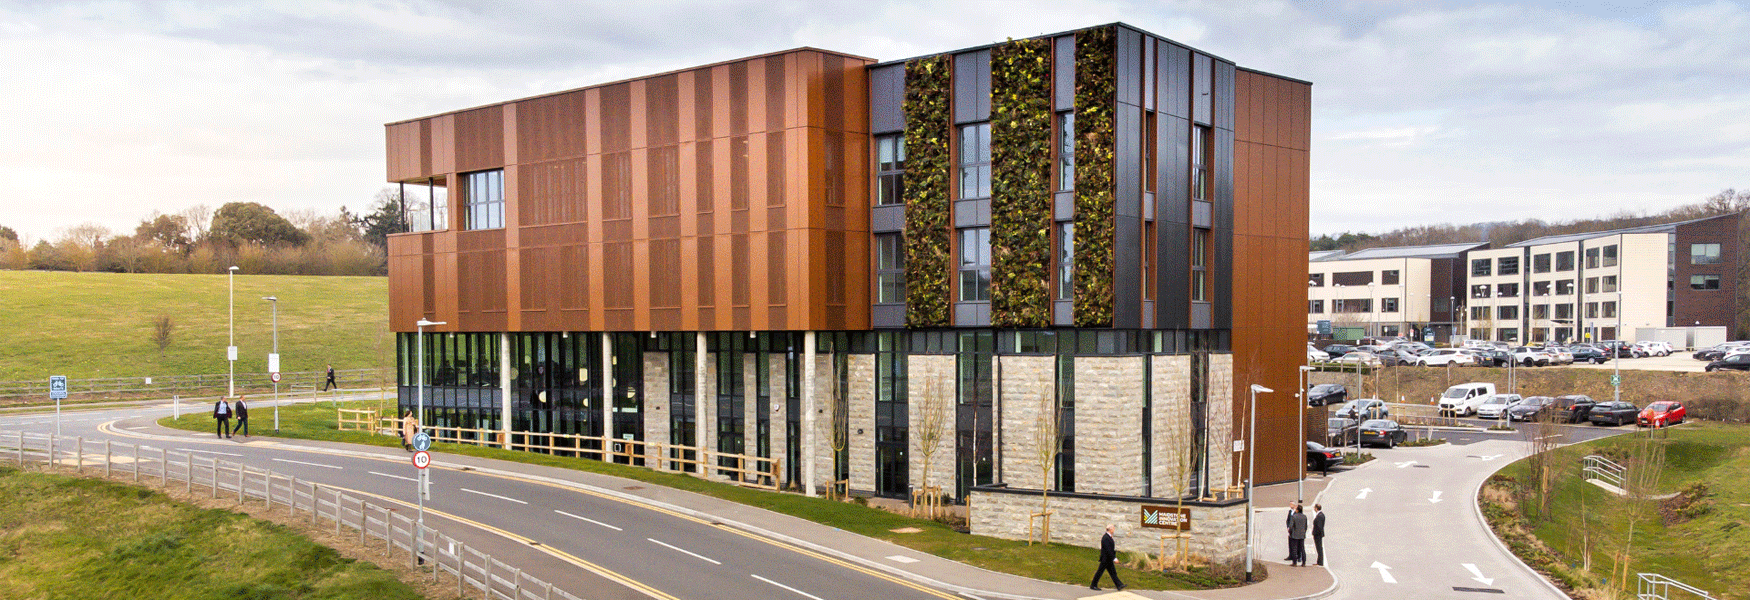 The exterior of Maidstone Innovation Centre